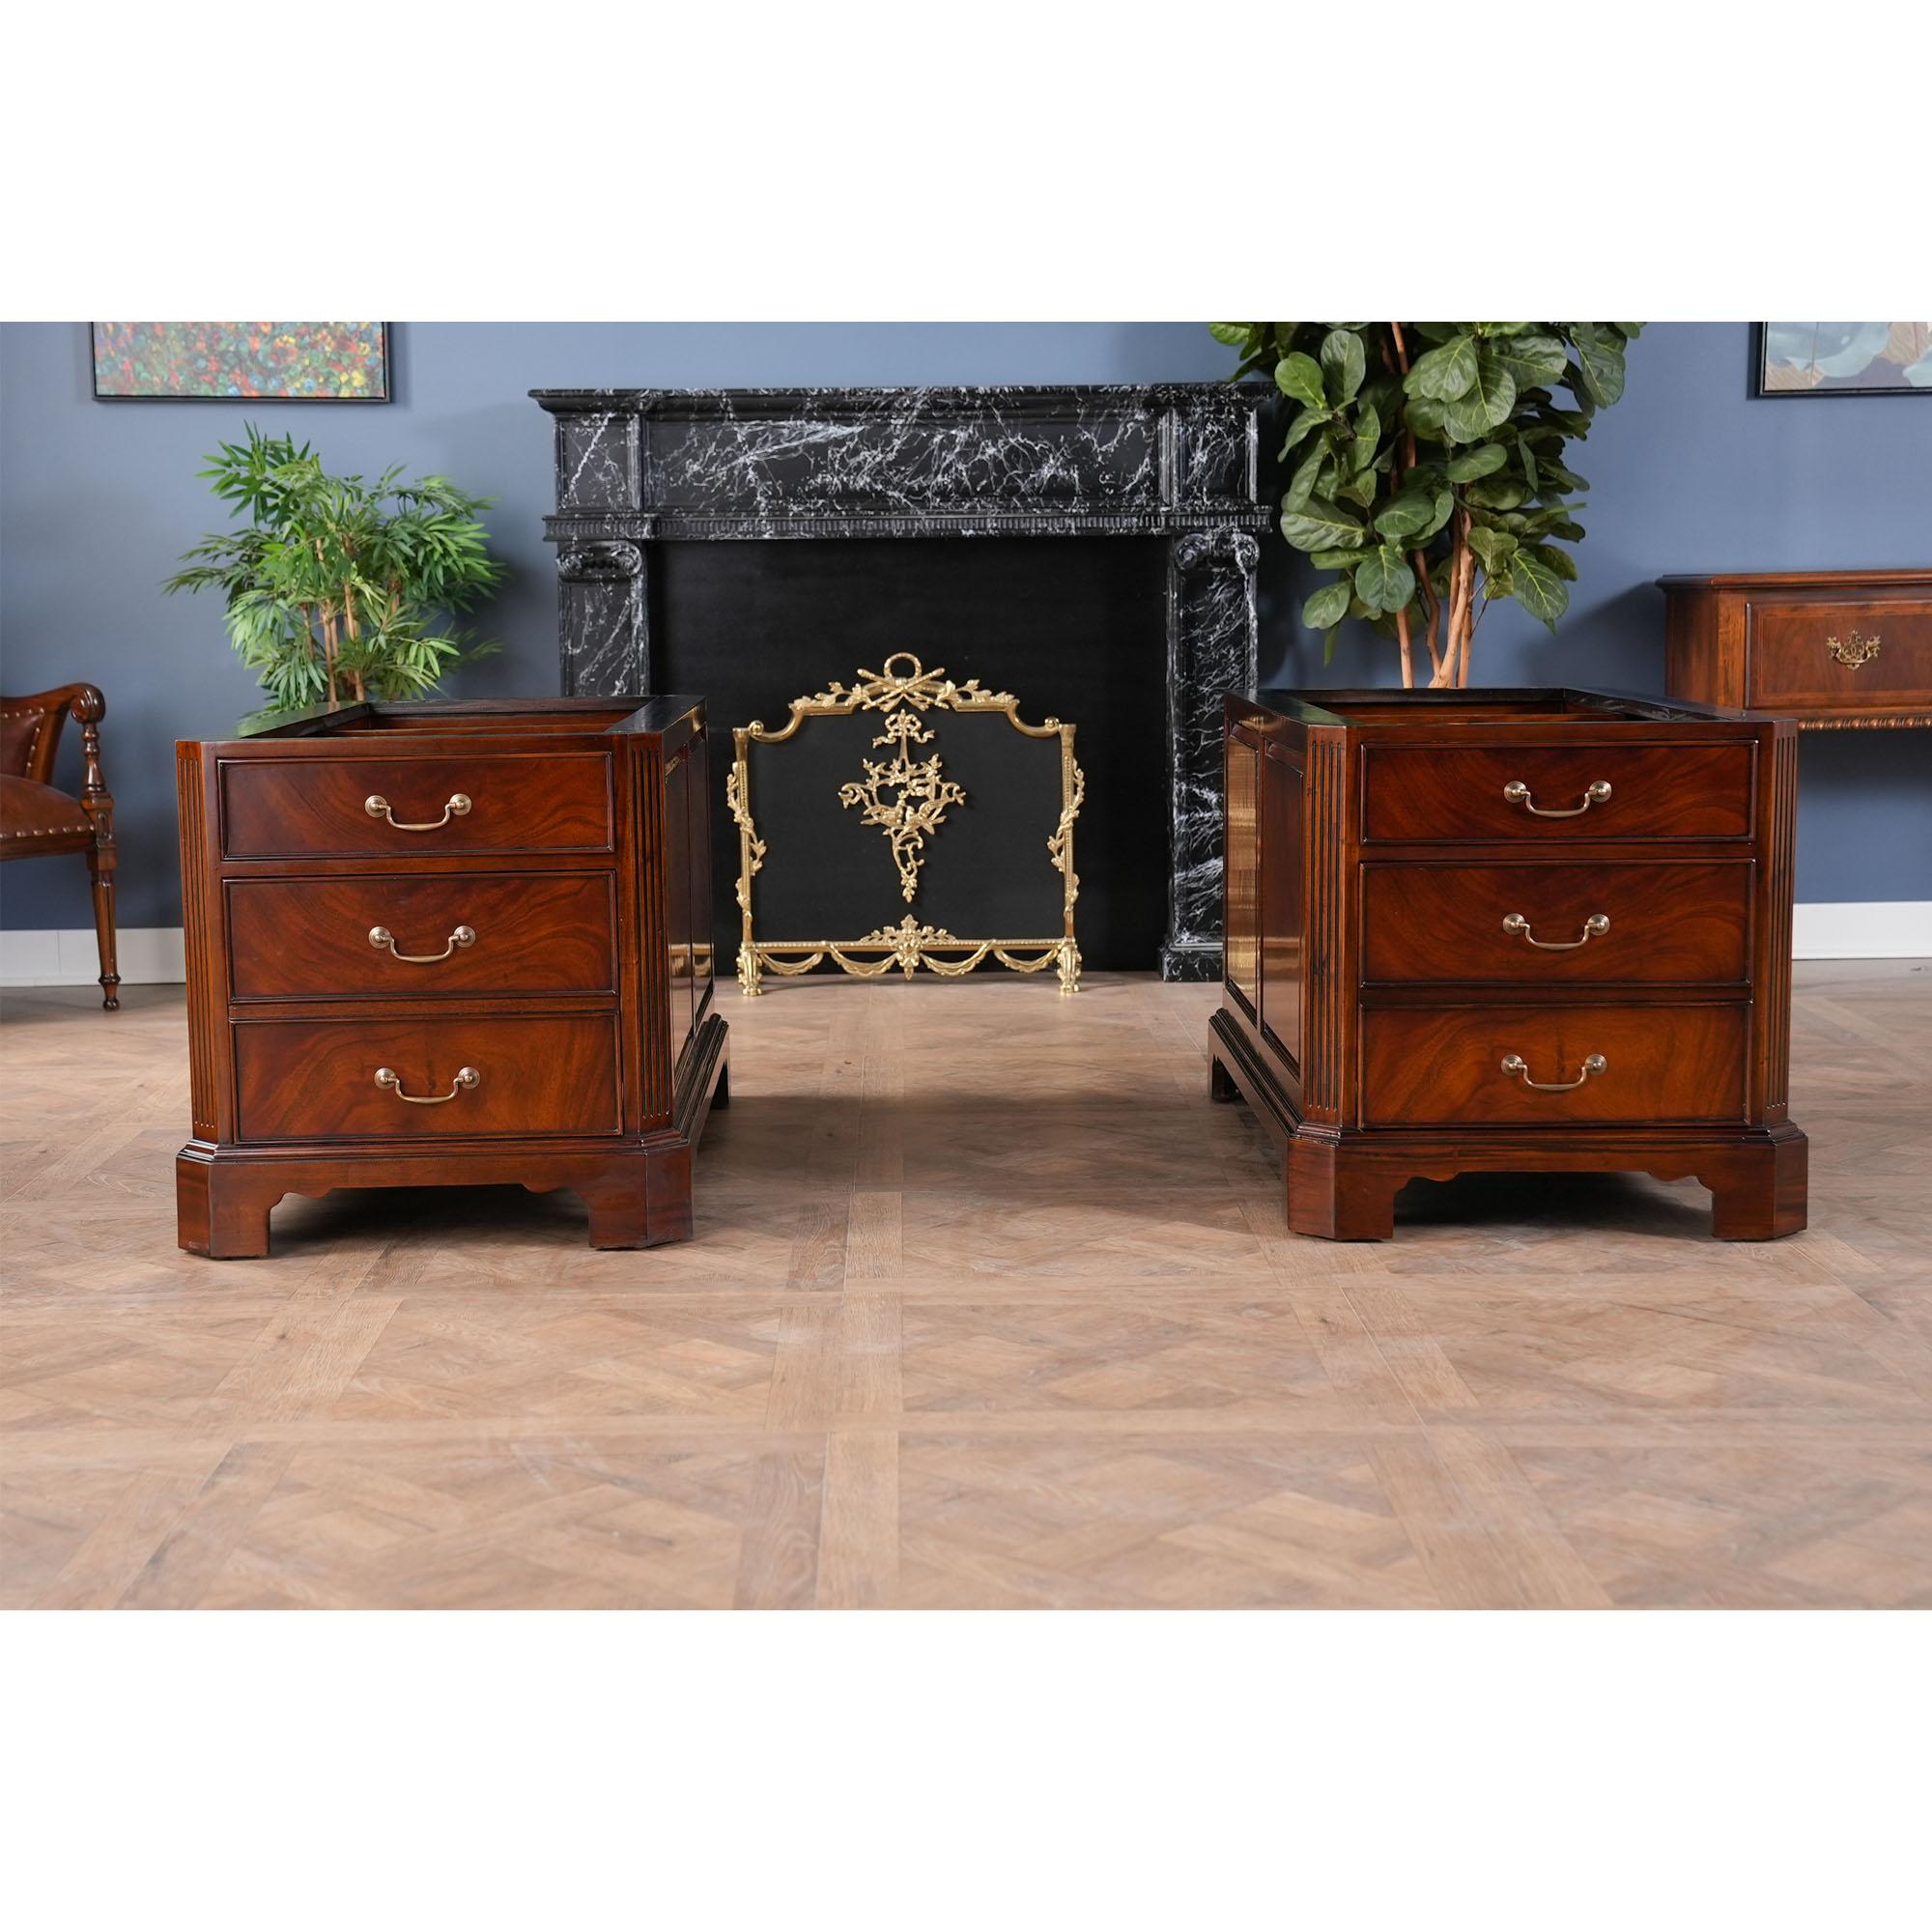 The Large Mahogany Partner Desk is the biggest desk in the Niagara Furniture collection. This desk matches a number of other pieces which we produce in the Penhurst family, please see the links below for related products. The fantastic solid